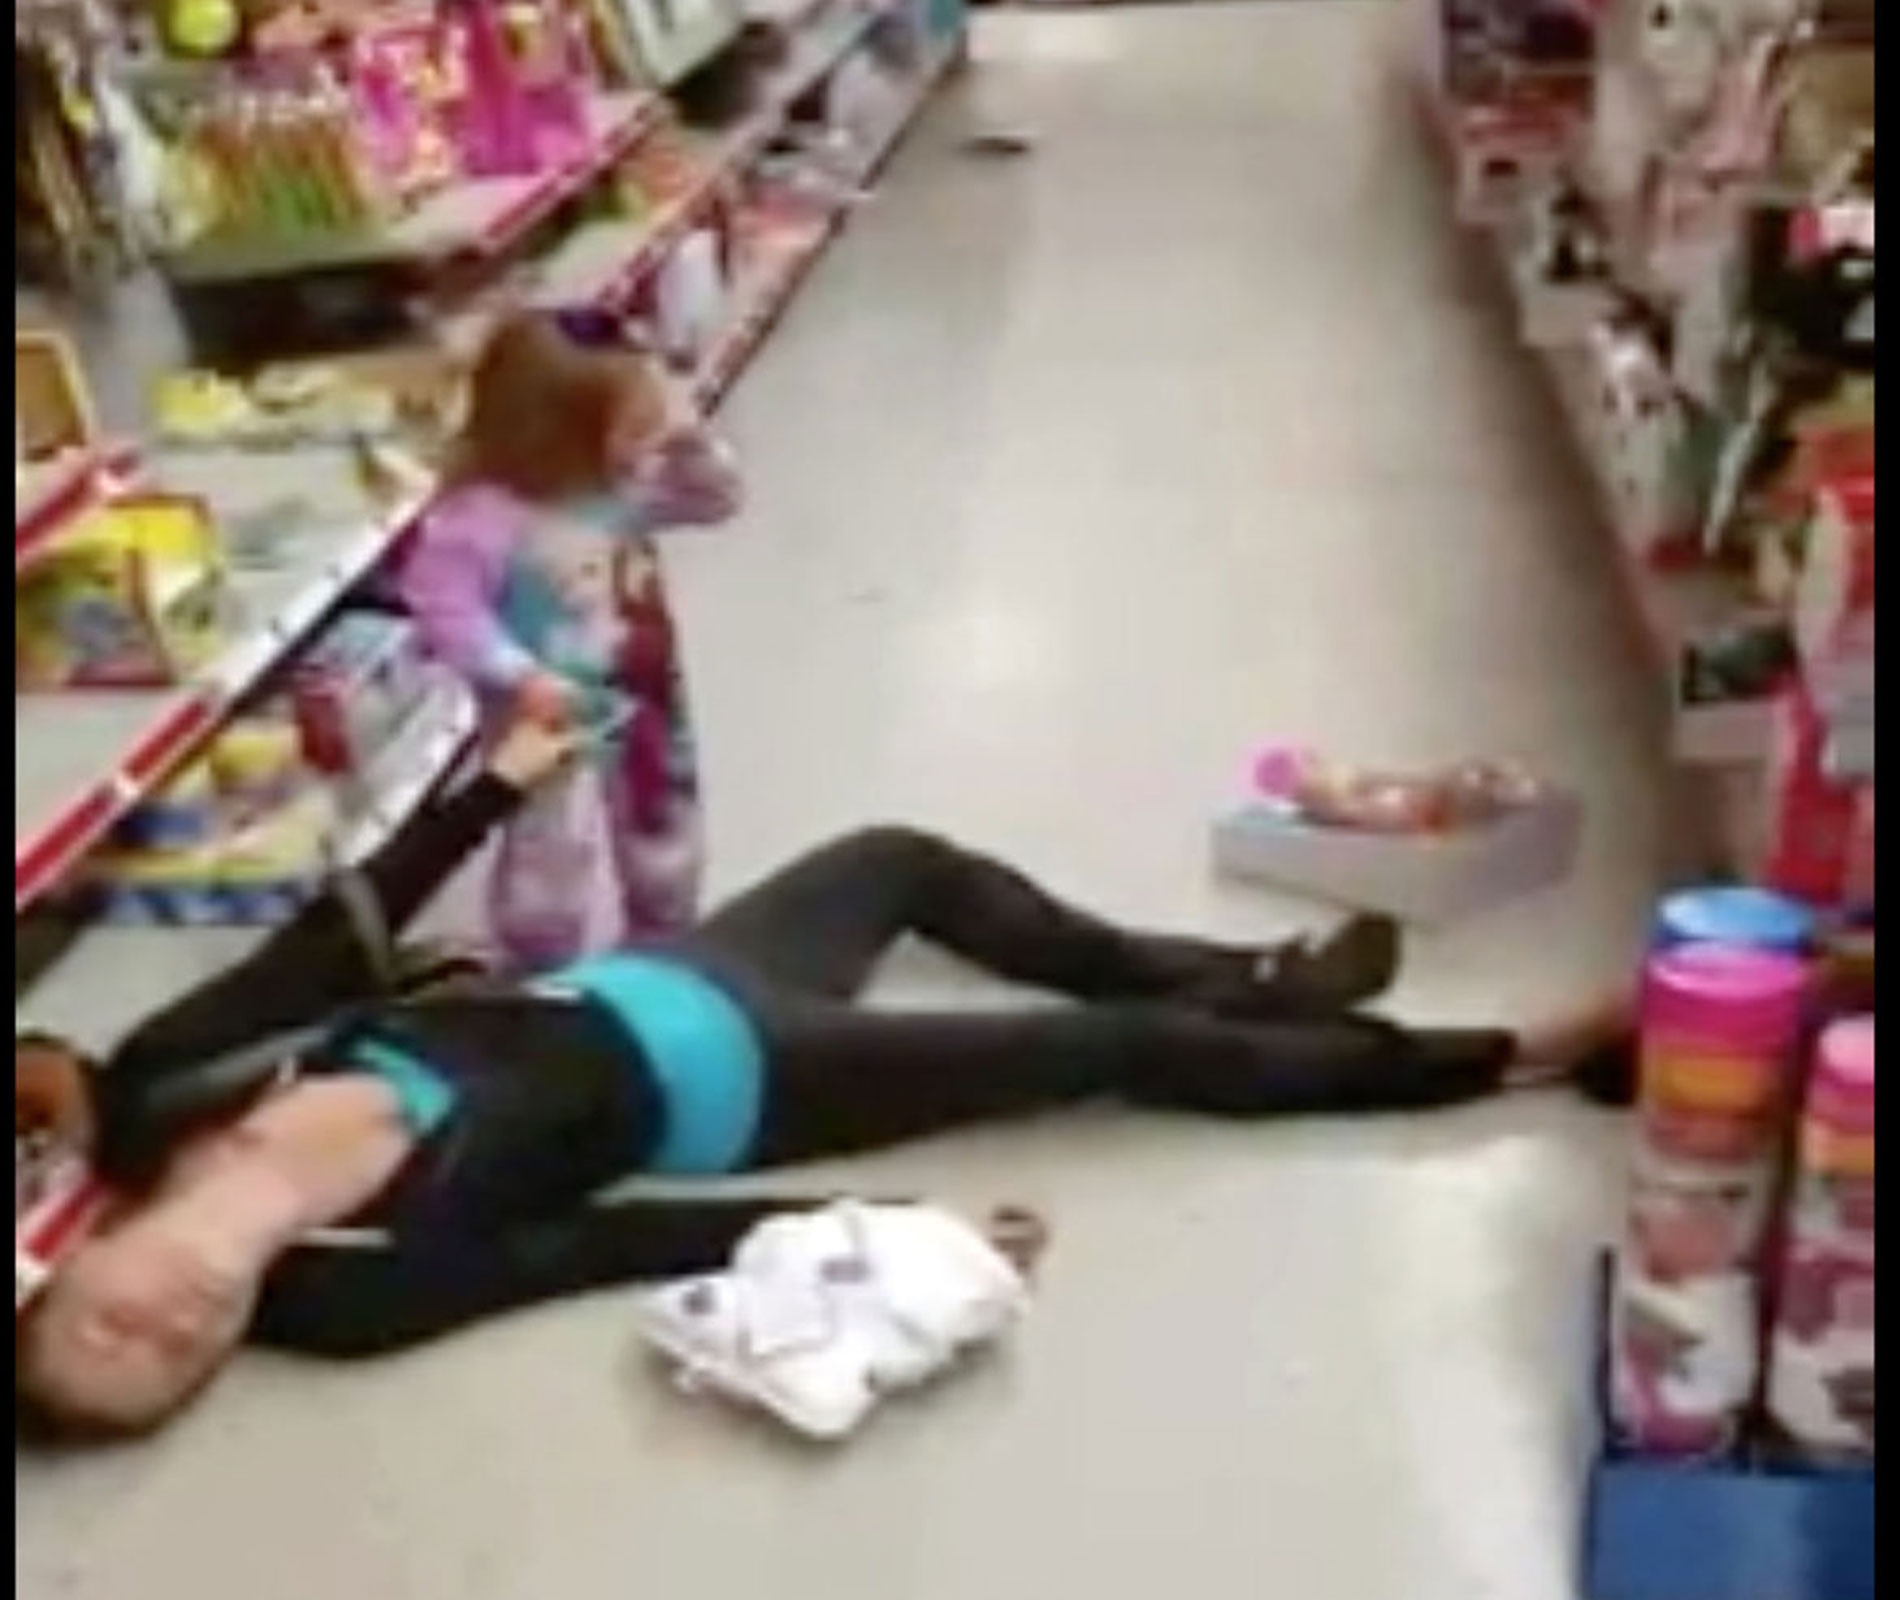 Toddler tries to wake mum from apparent overdose in discount store